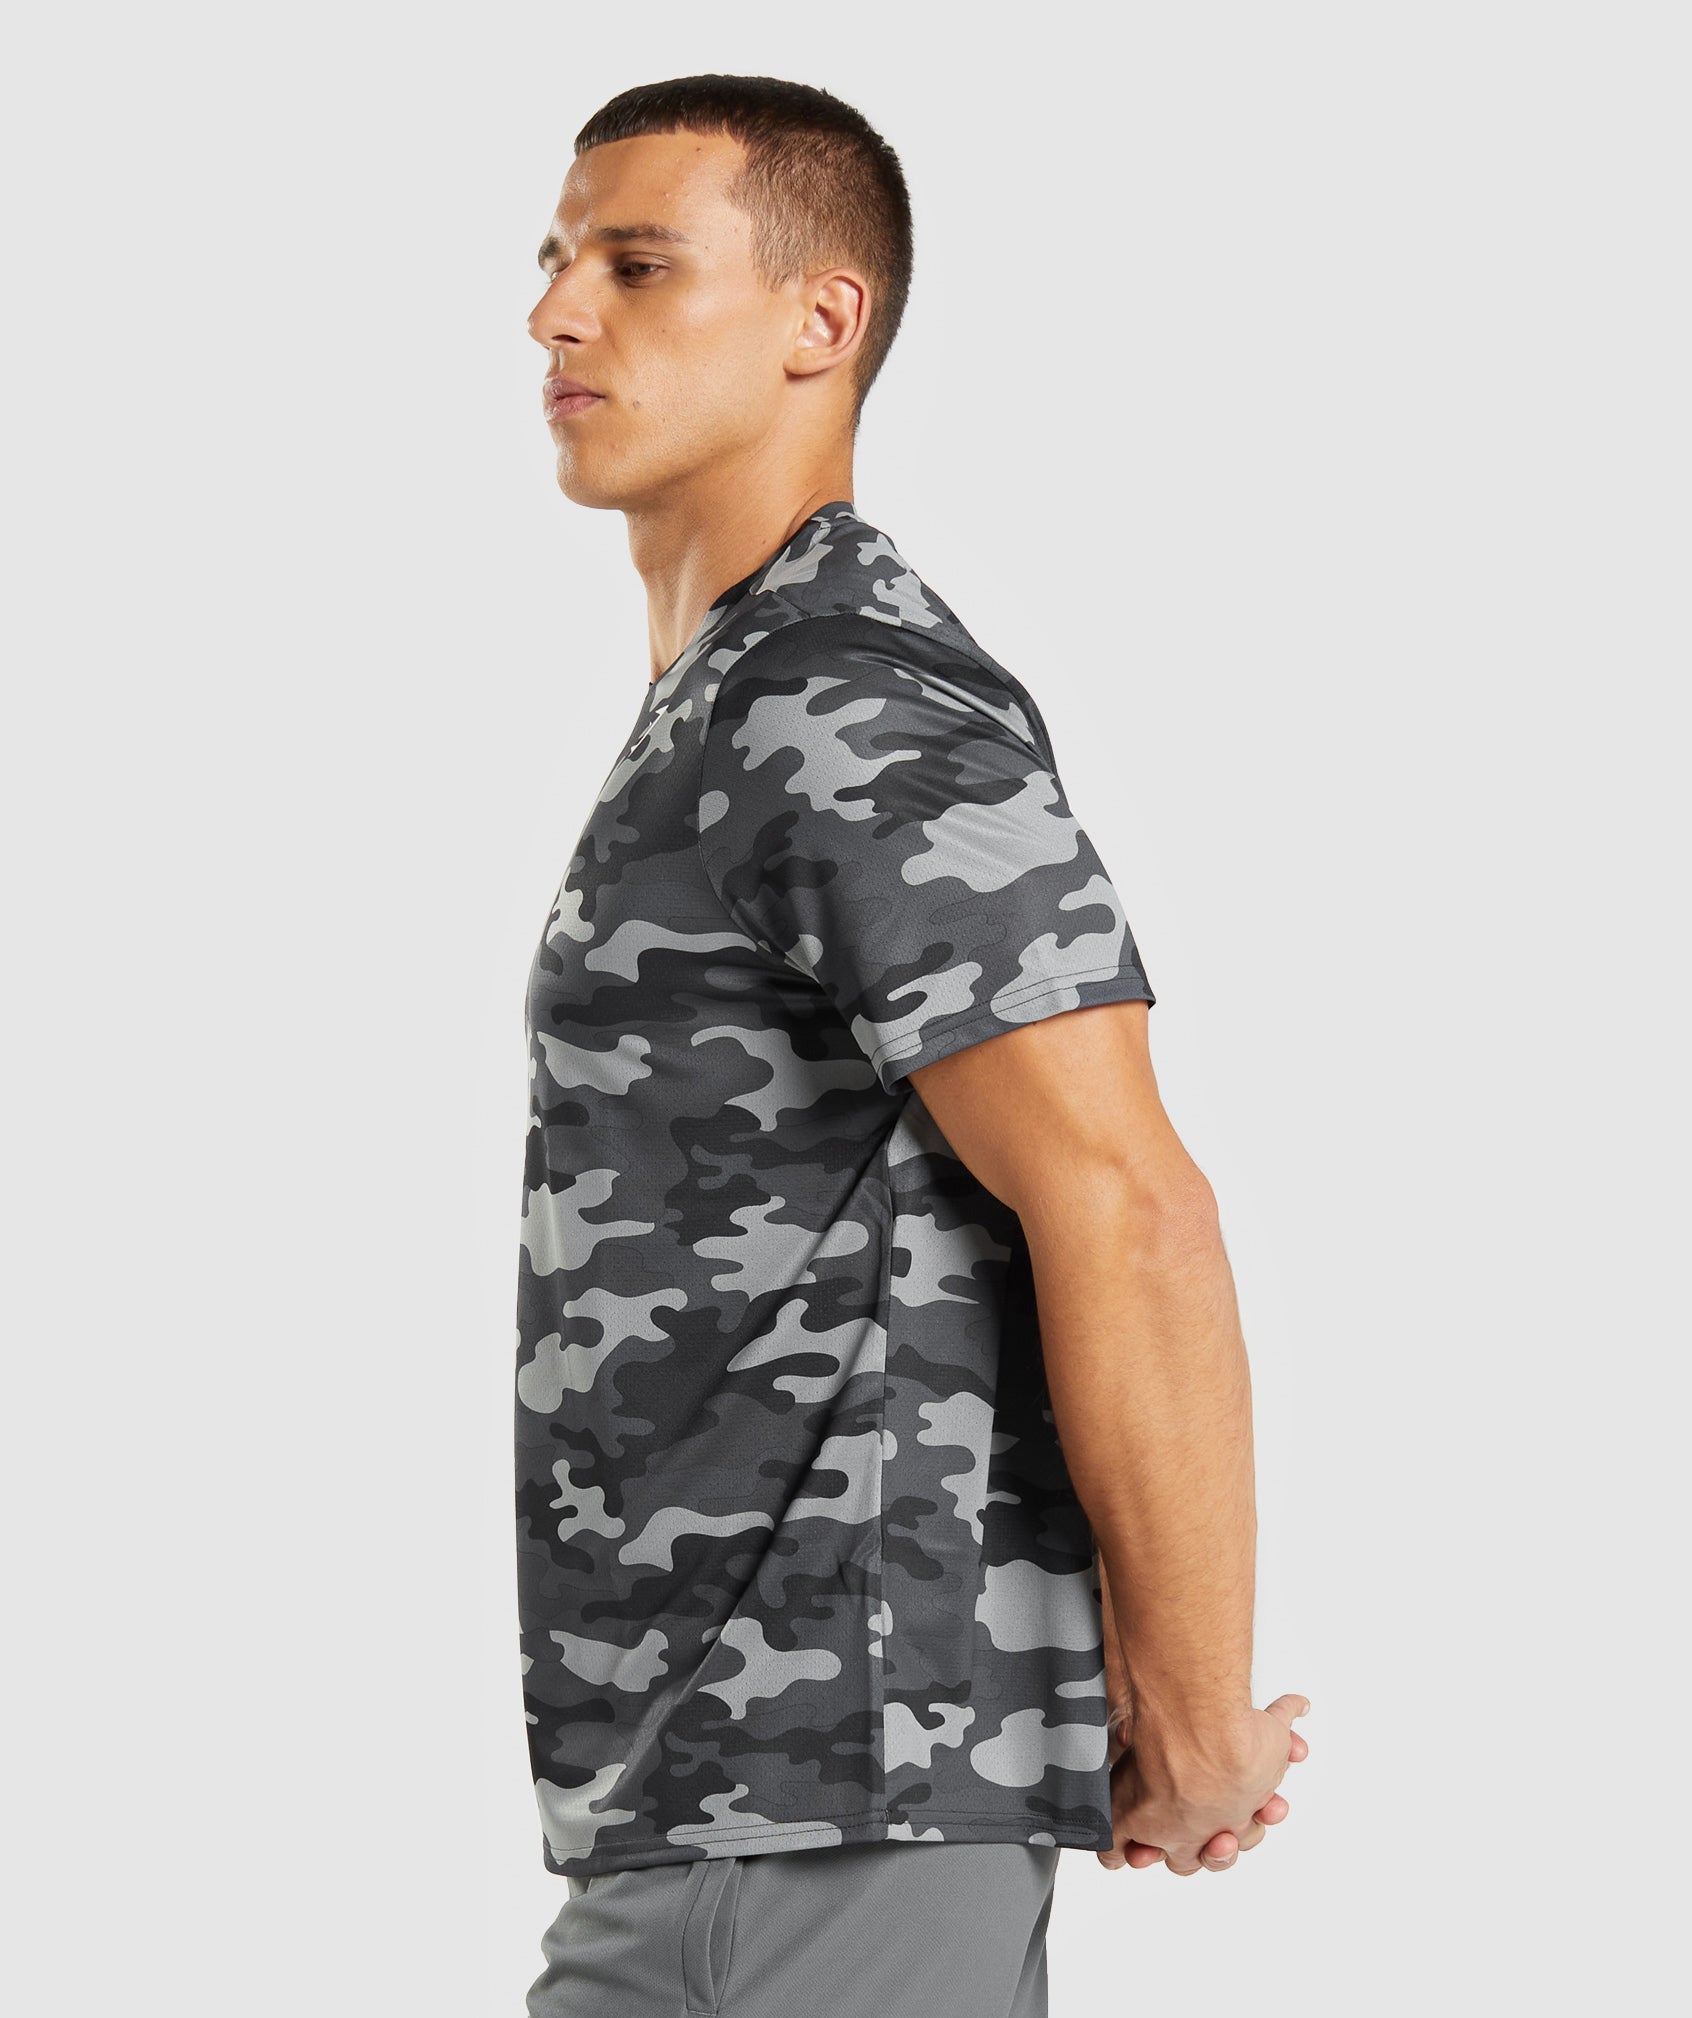 Arrival T-Shirt in Grey Print